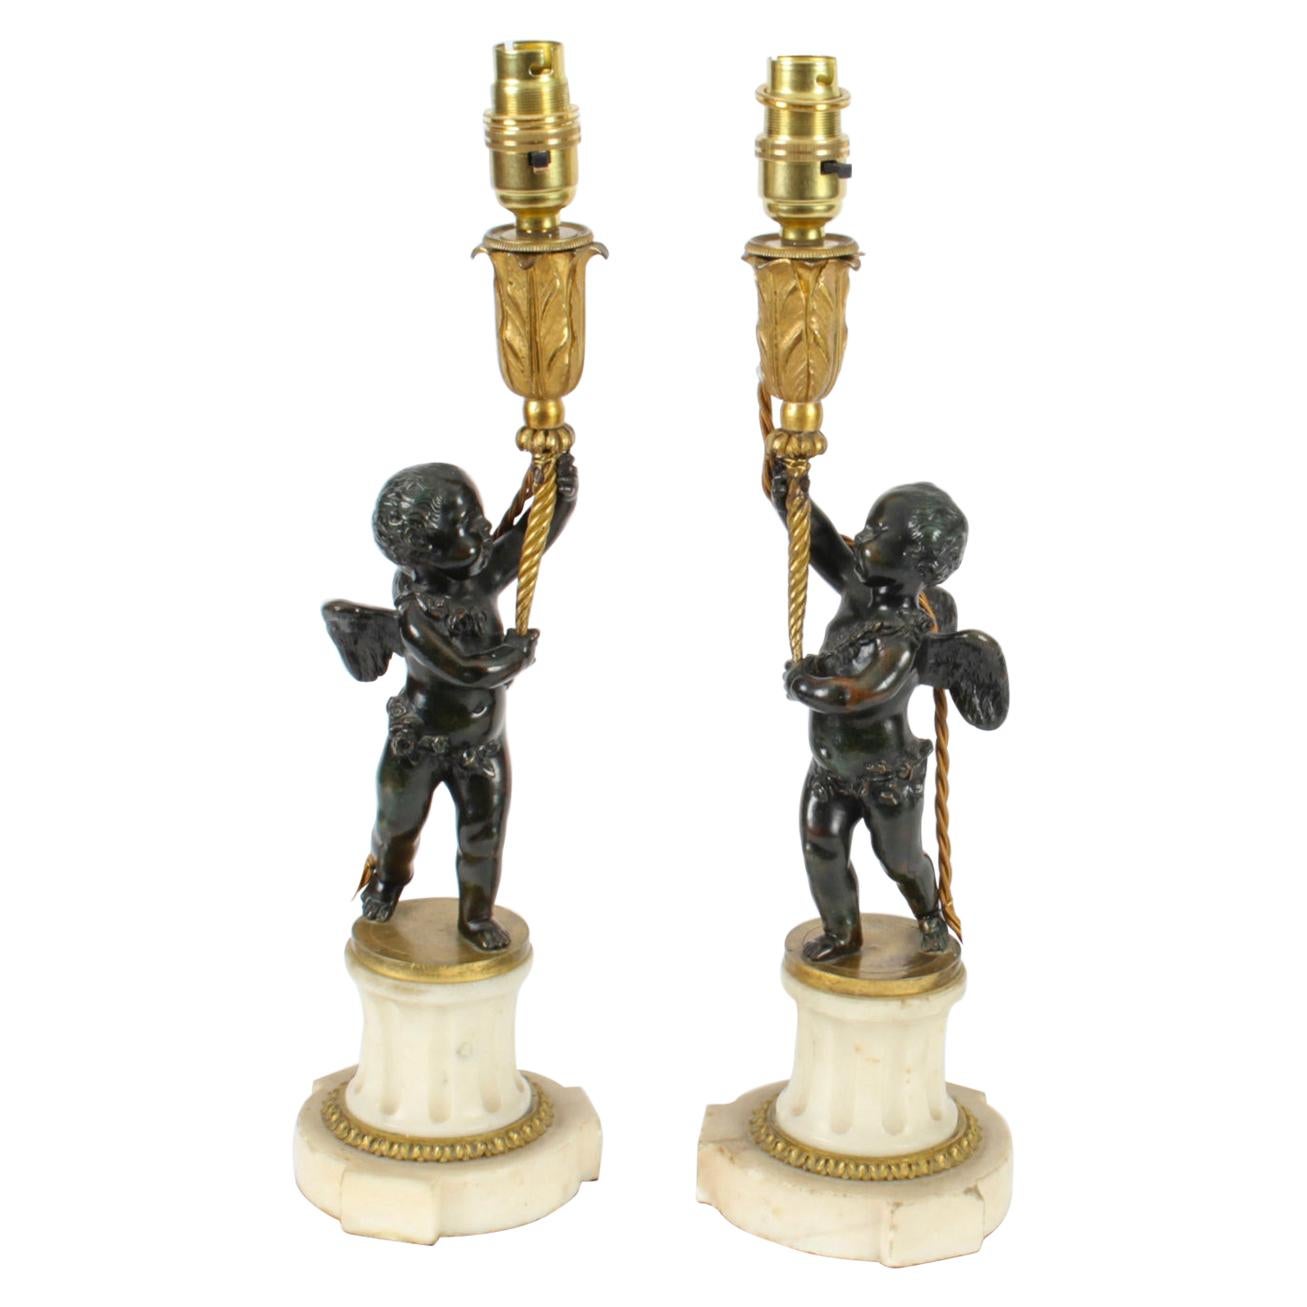 Antique Pair of French Ormolu & Patinated Bronze Cherub Table Lamps 19th C